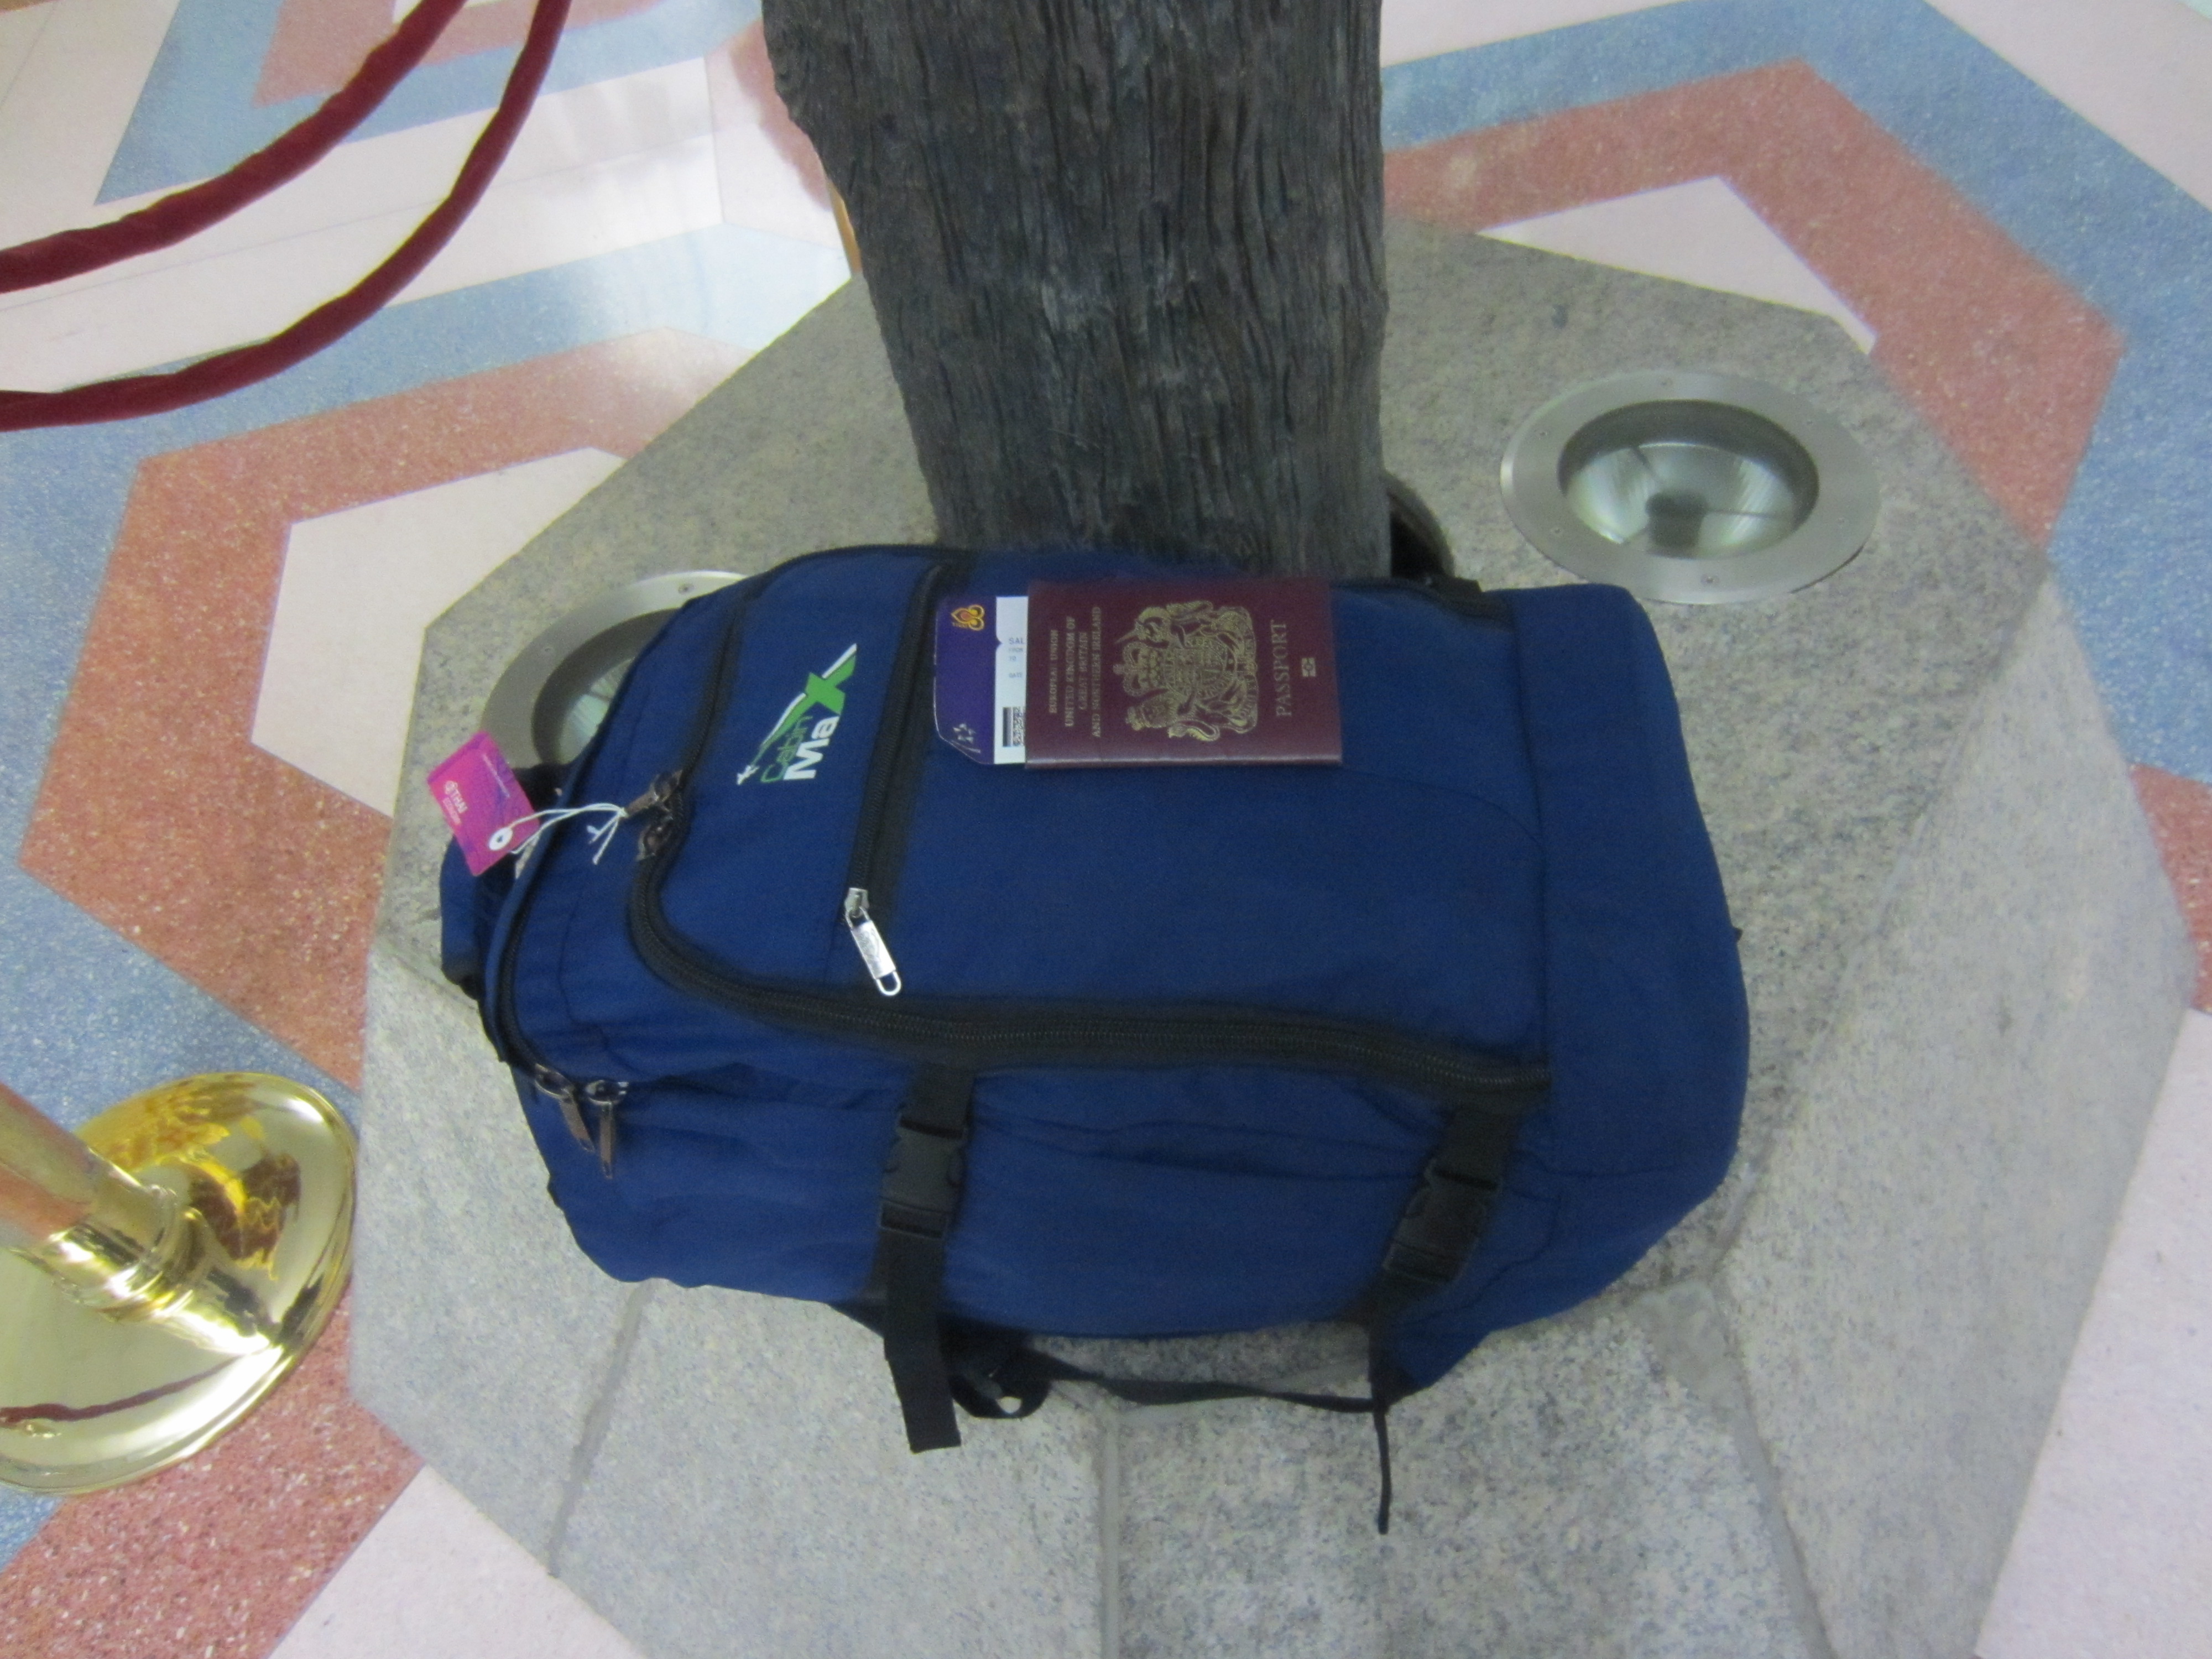 Travel gear review: Cabin Max Metz backpack (carry-on hand luggage)